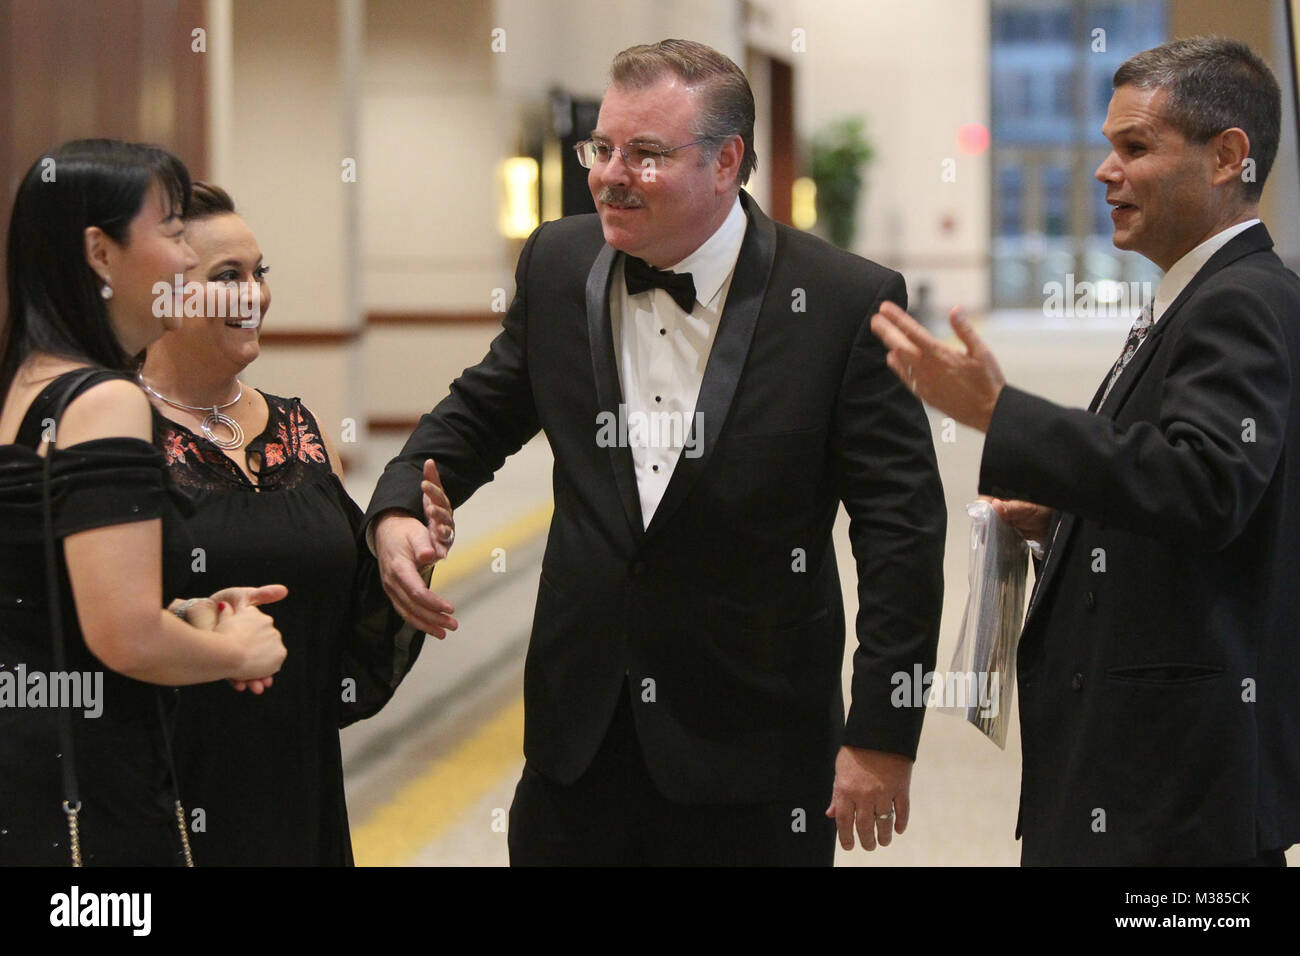 171014-N-HW977-075 RIVERSIDE, Calif. (Oct. 14, 2017) Alice Luh, left, Renee Schumacher, Richard Schumacher, Measurement Science and Engineering Department head, and Peter Solis greet one another on arrival during the 2017 Inland Empire Navy Birthday Ball. The sold-out event, commemorating the U.S. Navy's 242nd birthday, included dinner, ceremonies, music and dancing and featured a keynote address by Capt. Stephen H. Murray, Naval Surface Warfare Center (NSWC) chief engineer. All proceeds to benefit the Navy-Marine Corps Relief Society. (U.S. Navy photo by Greg Vojtko/Released) 171014-N-HW977-0 Stock Photo